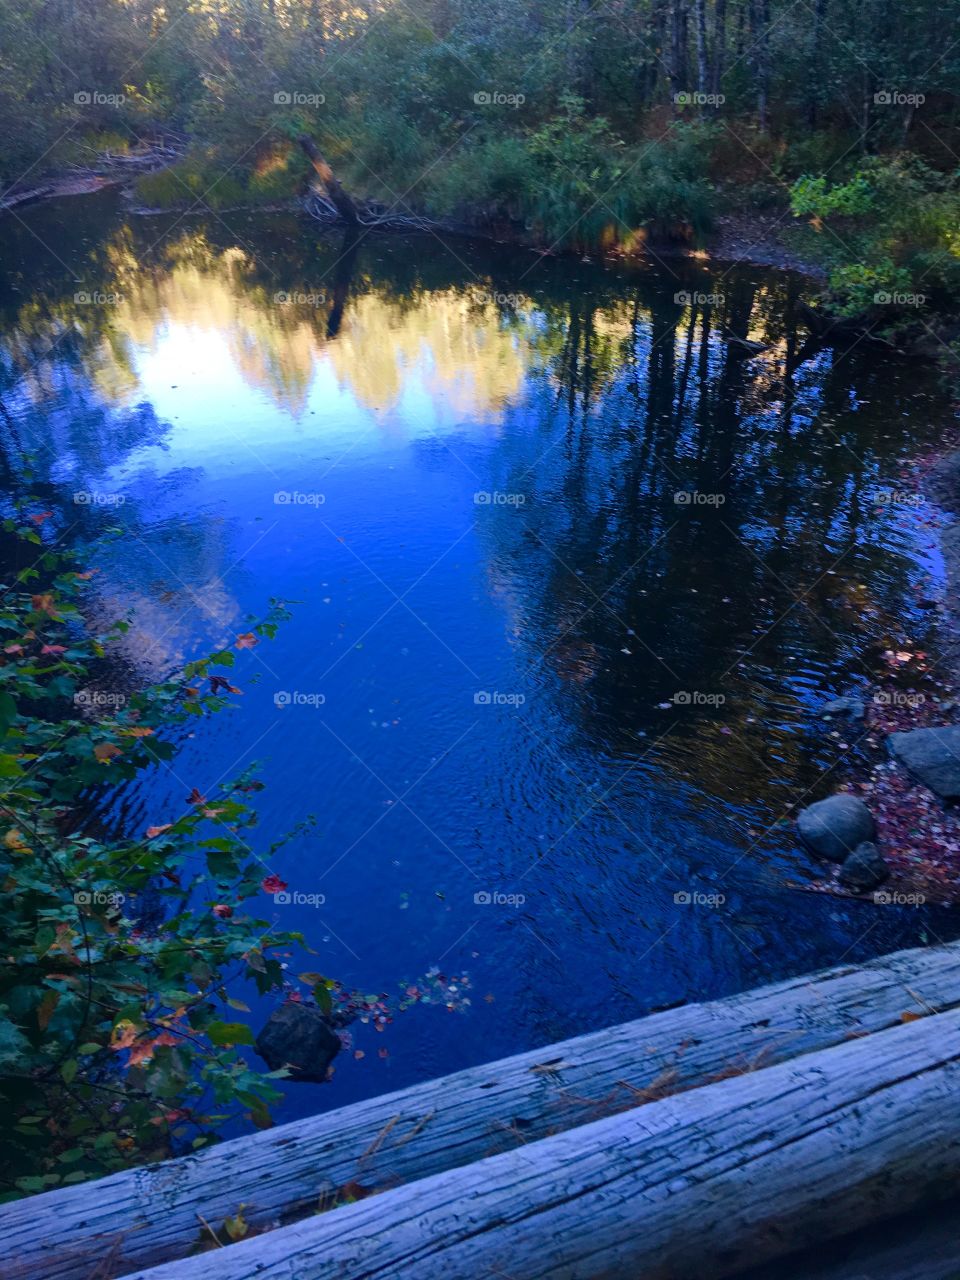 Reflection from the bridge